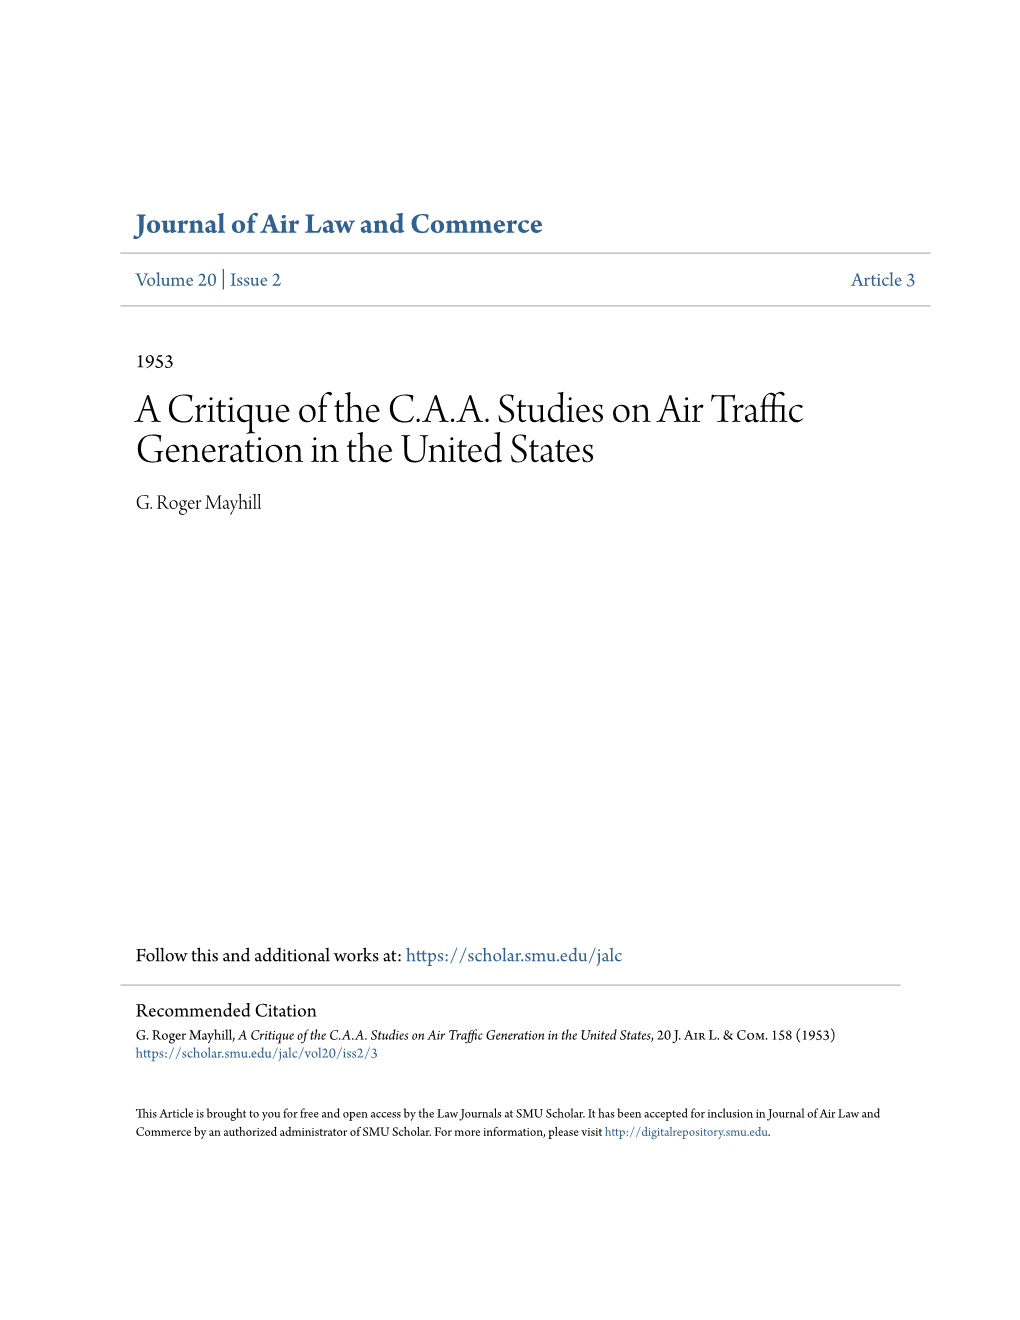 A Critique of the C.A.A. Studies on Air Traffic Generation in the United States G